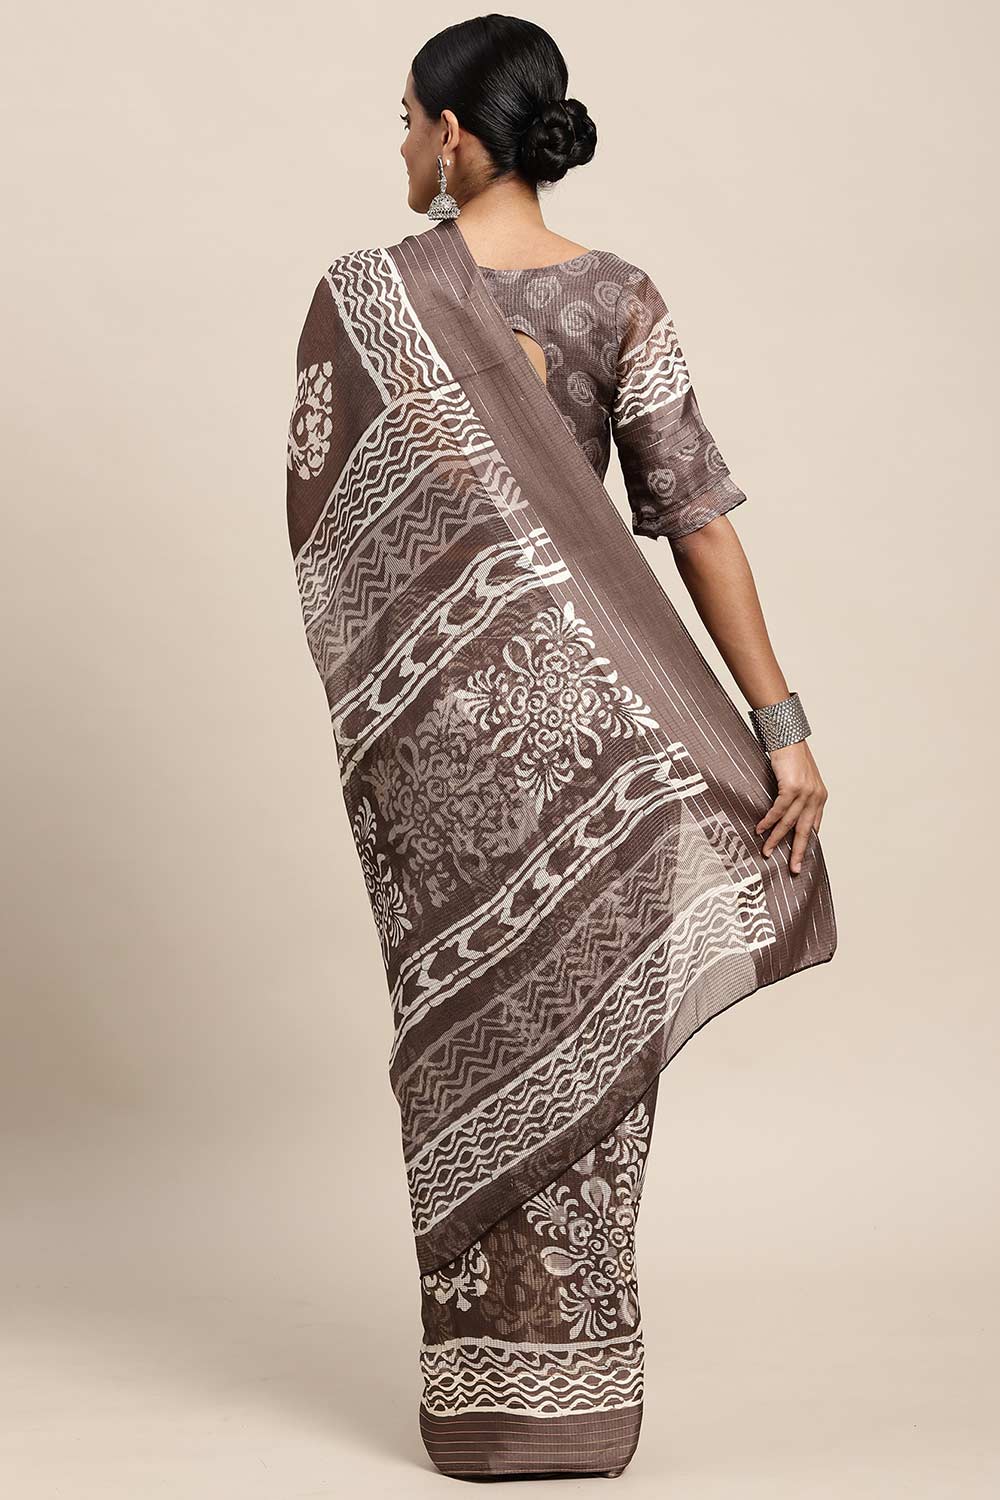 Shop Lisa Charcoal Grey Brasso Bagru Ikat Print One Minute Saree at best offer at our  Store - One Minute Saree